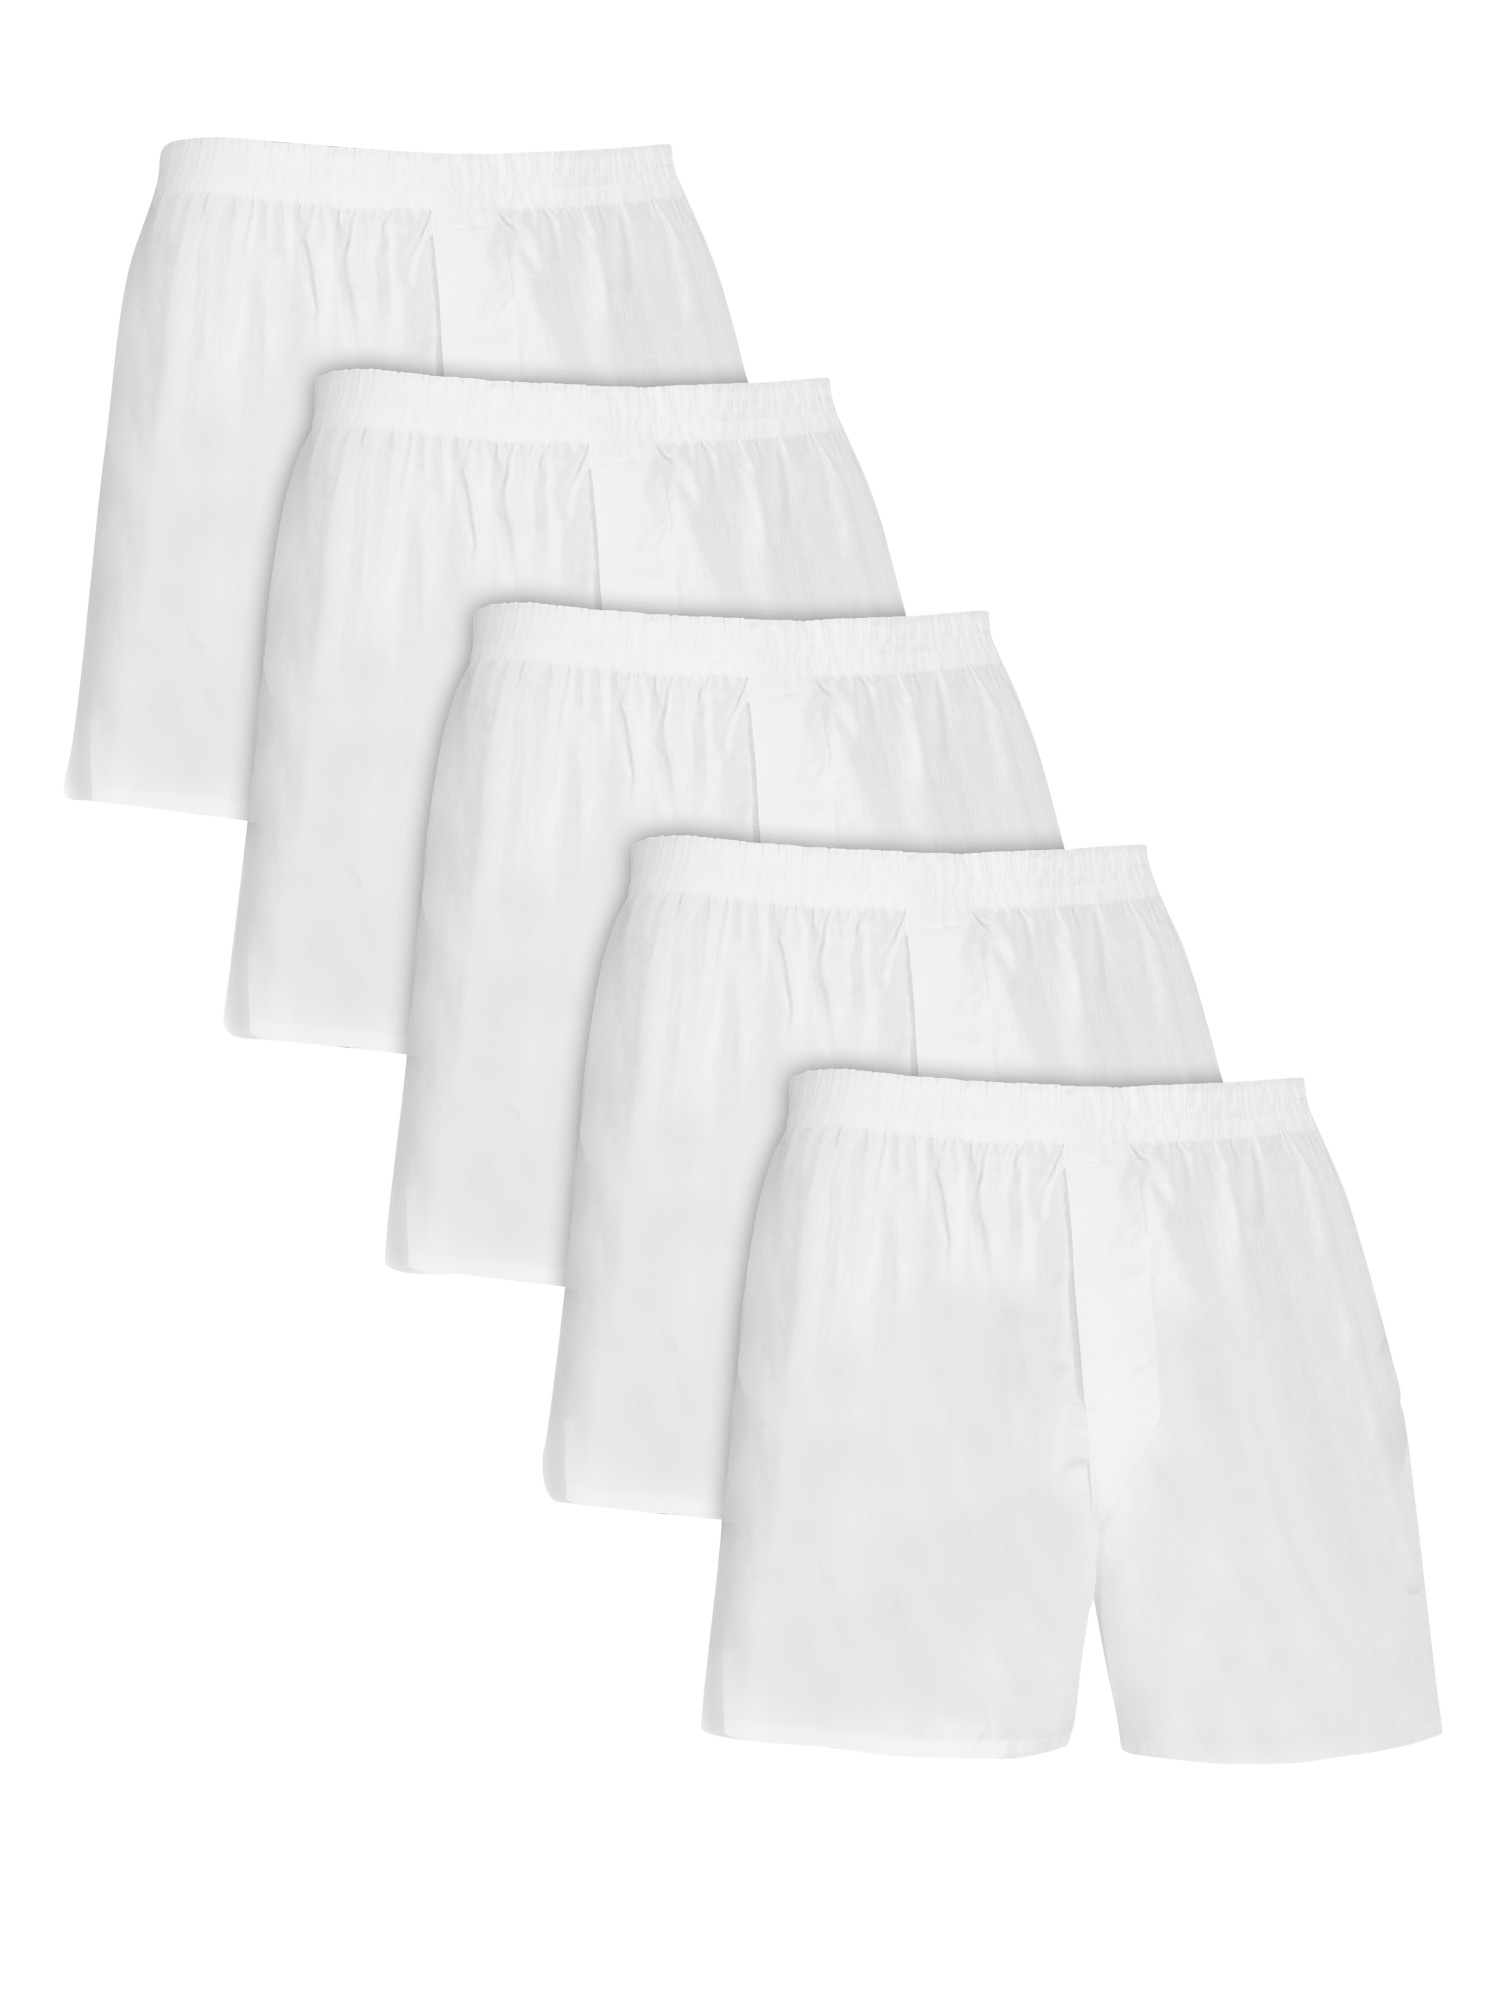 Fruit of the Loom Men's Woven Boxers, 5 Pack - image 1 of 10